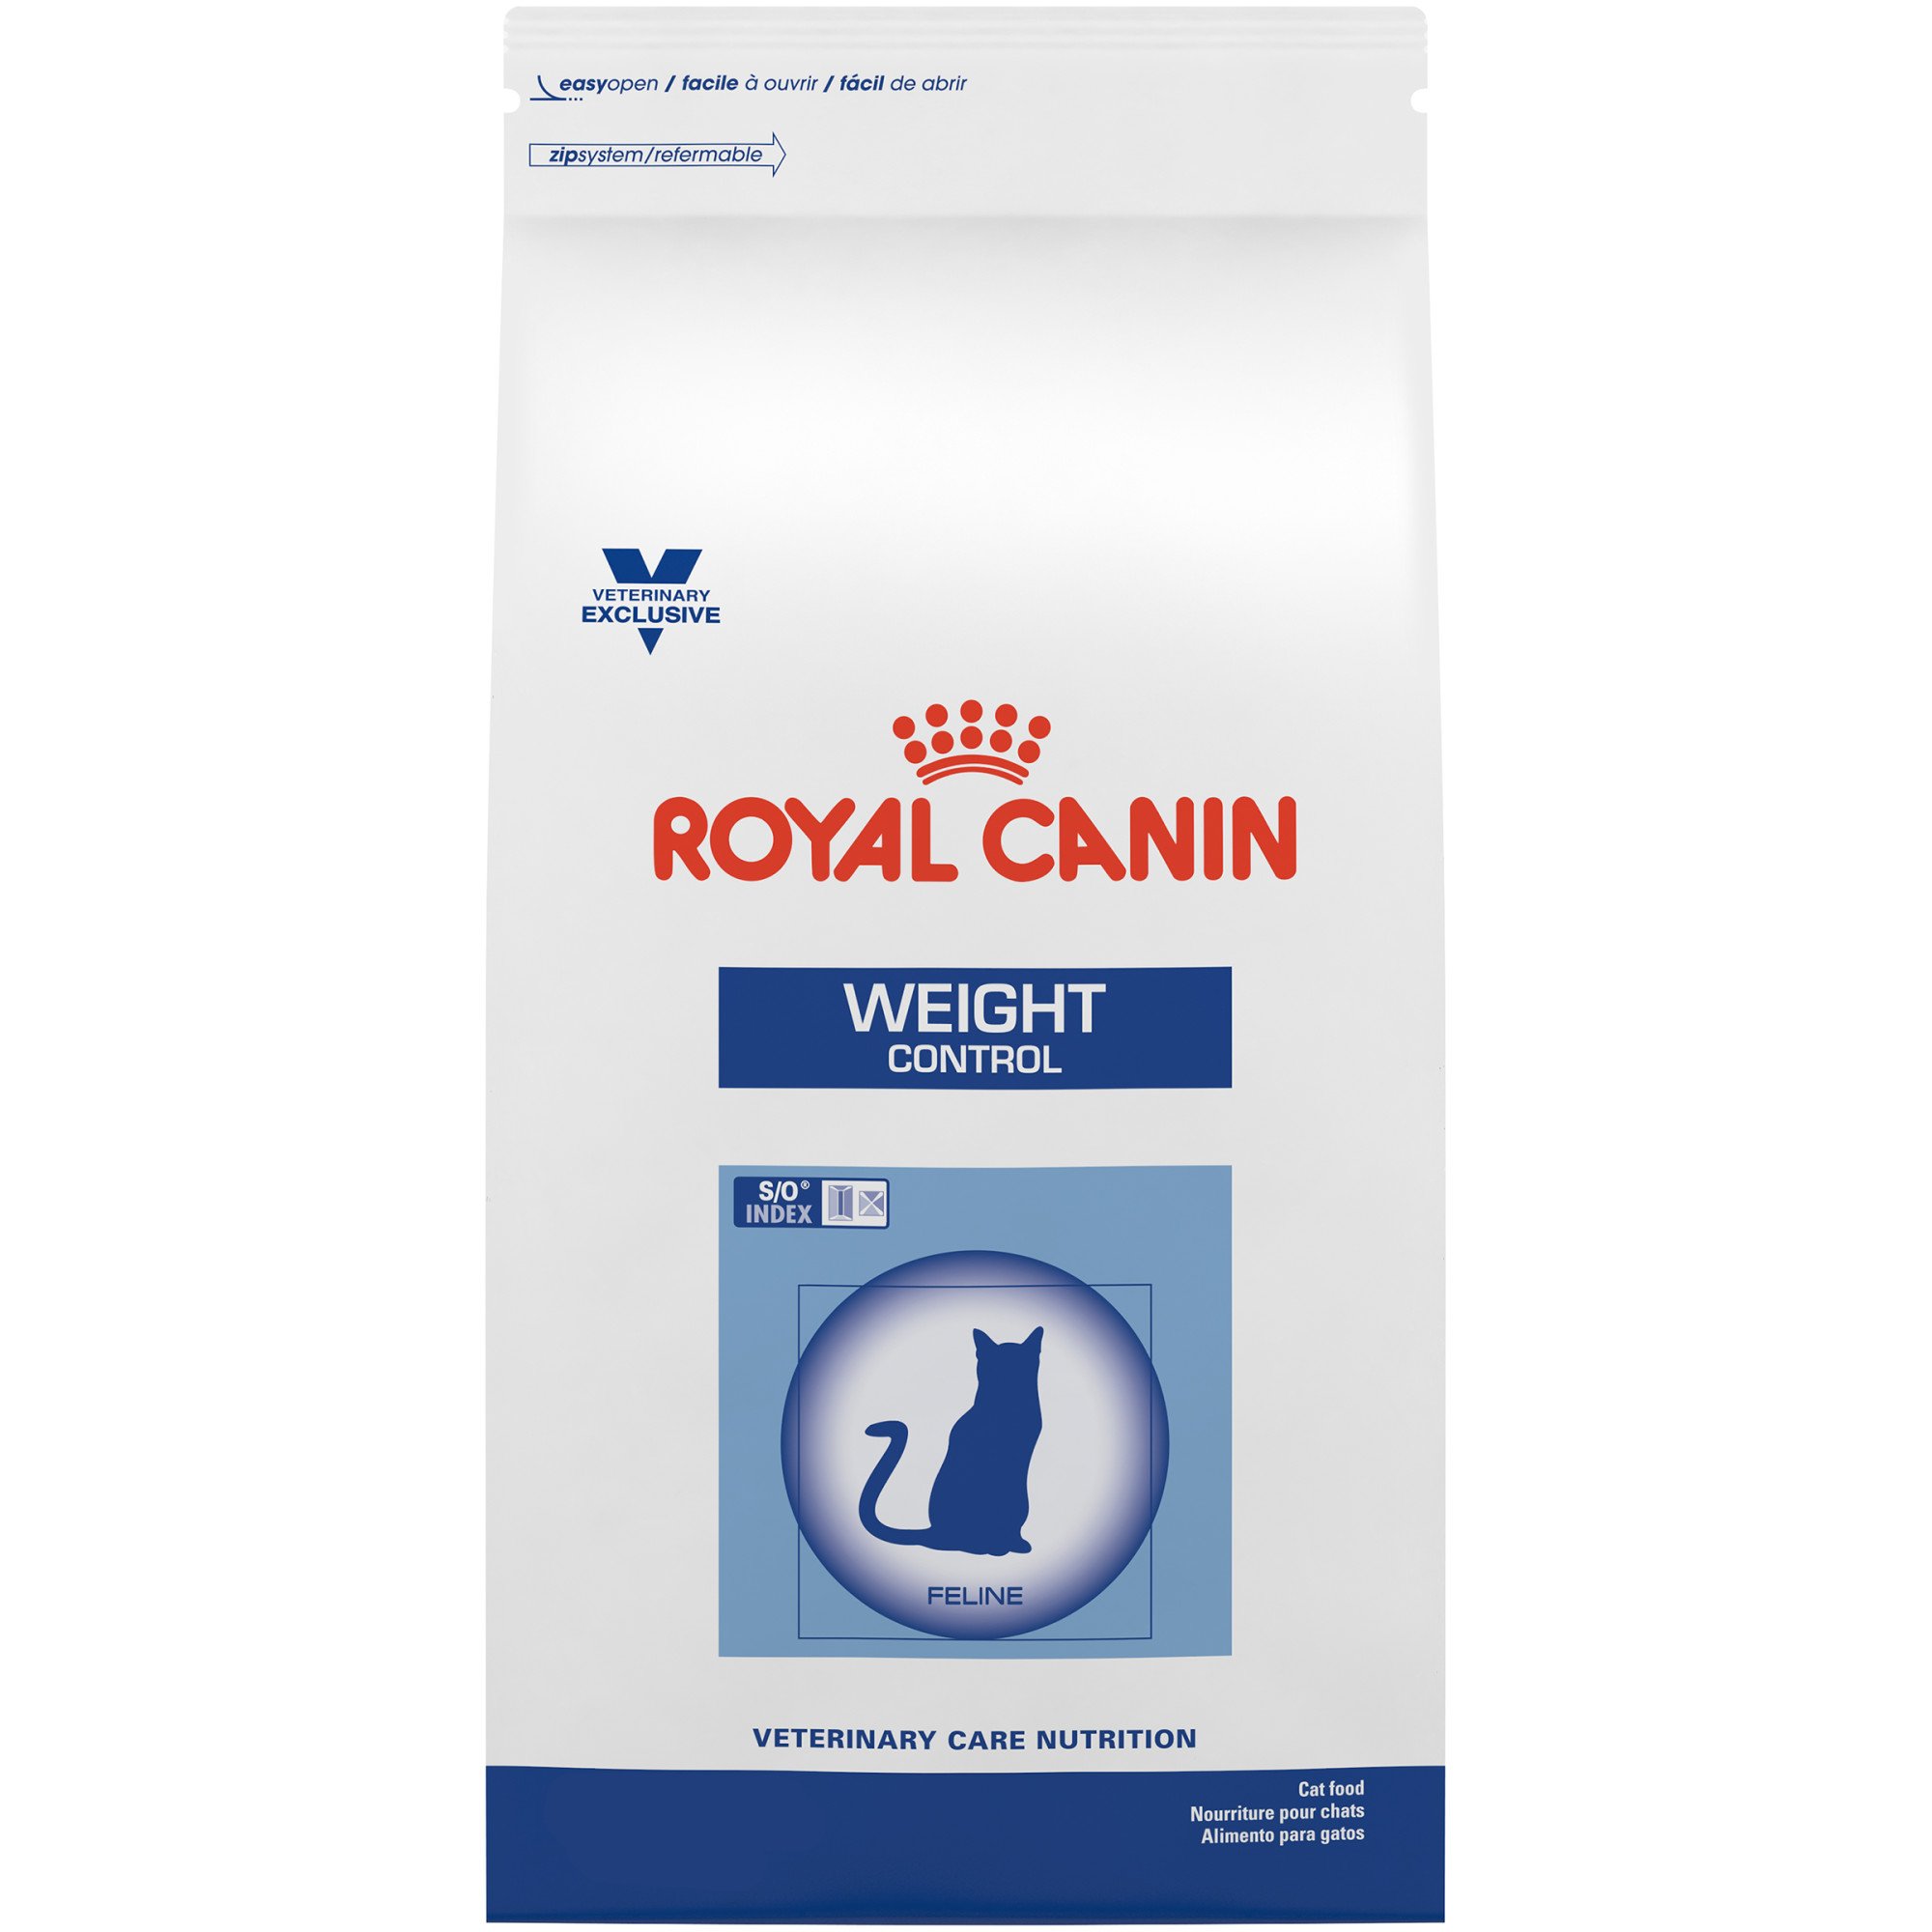 Royal Canin Veterinary Care Nutrition Feline Weight Control Dry Cat